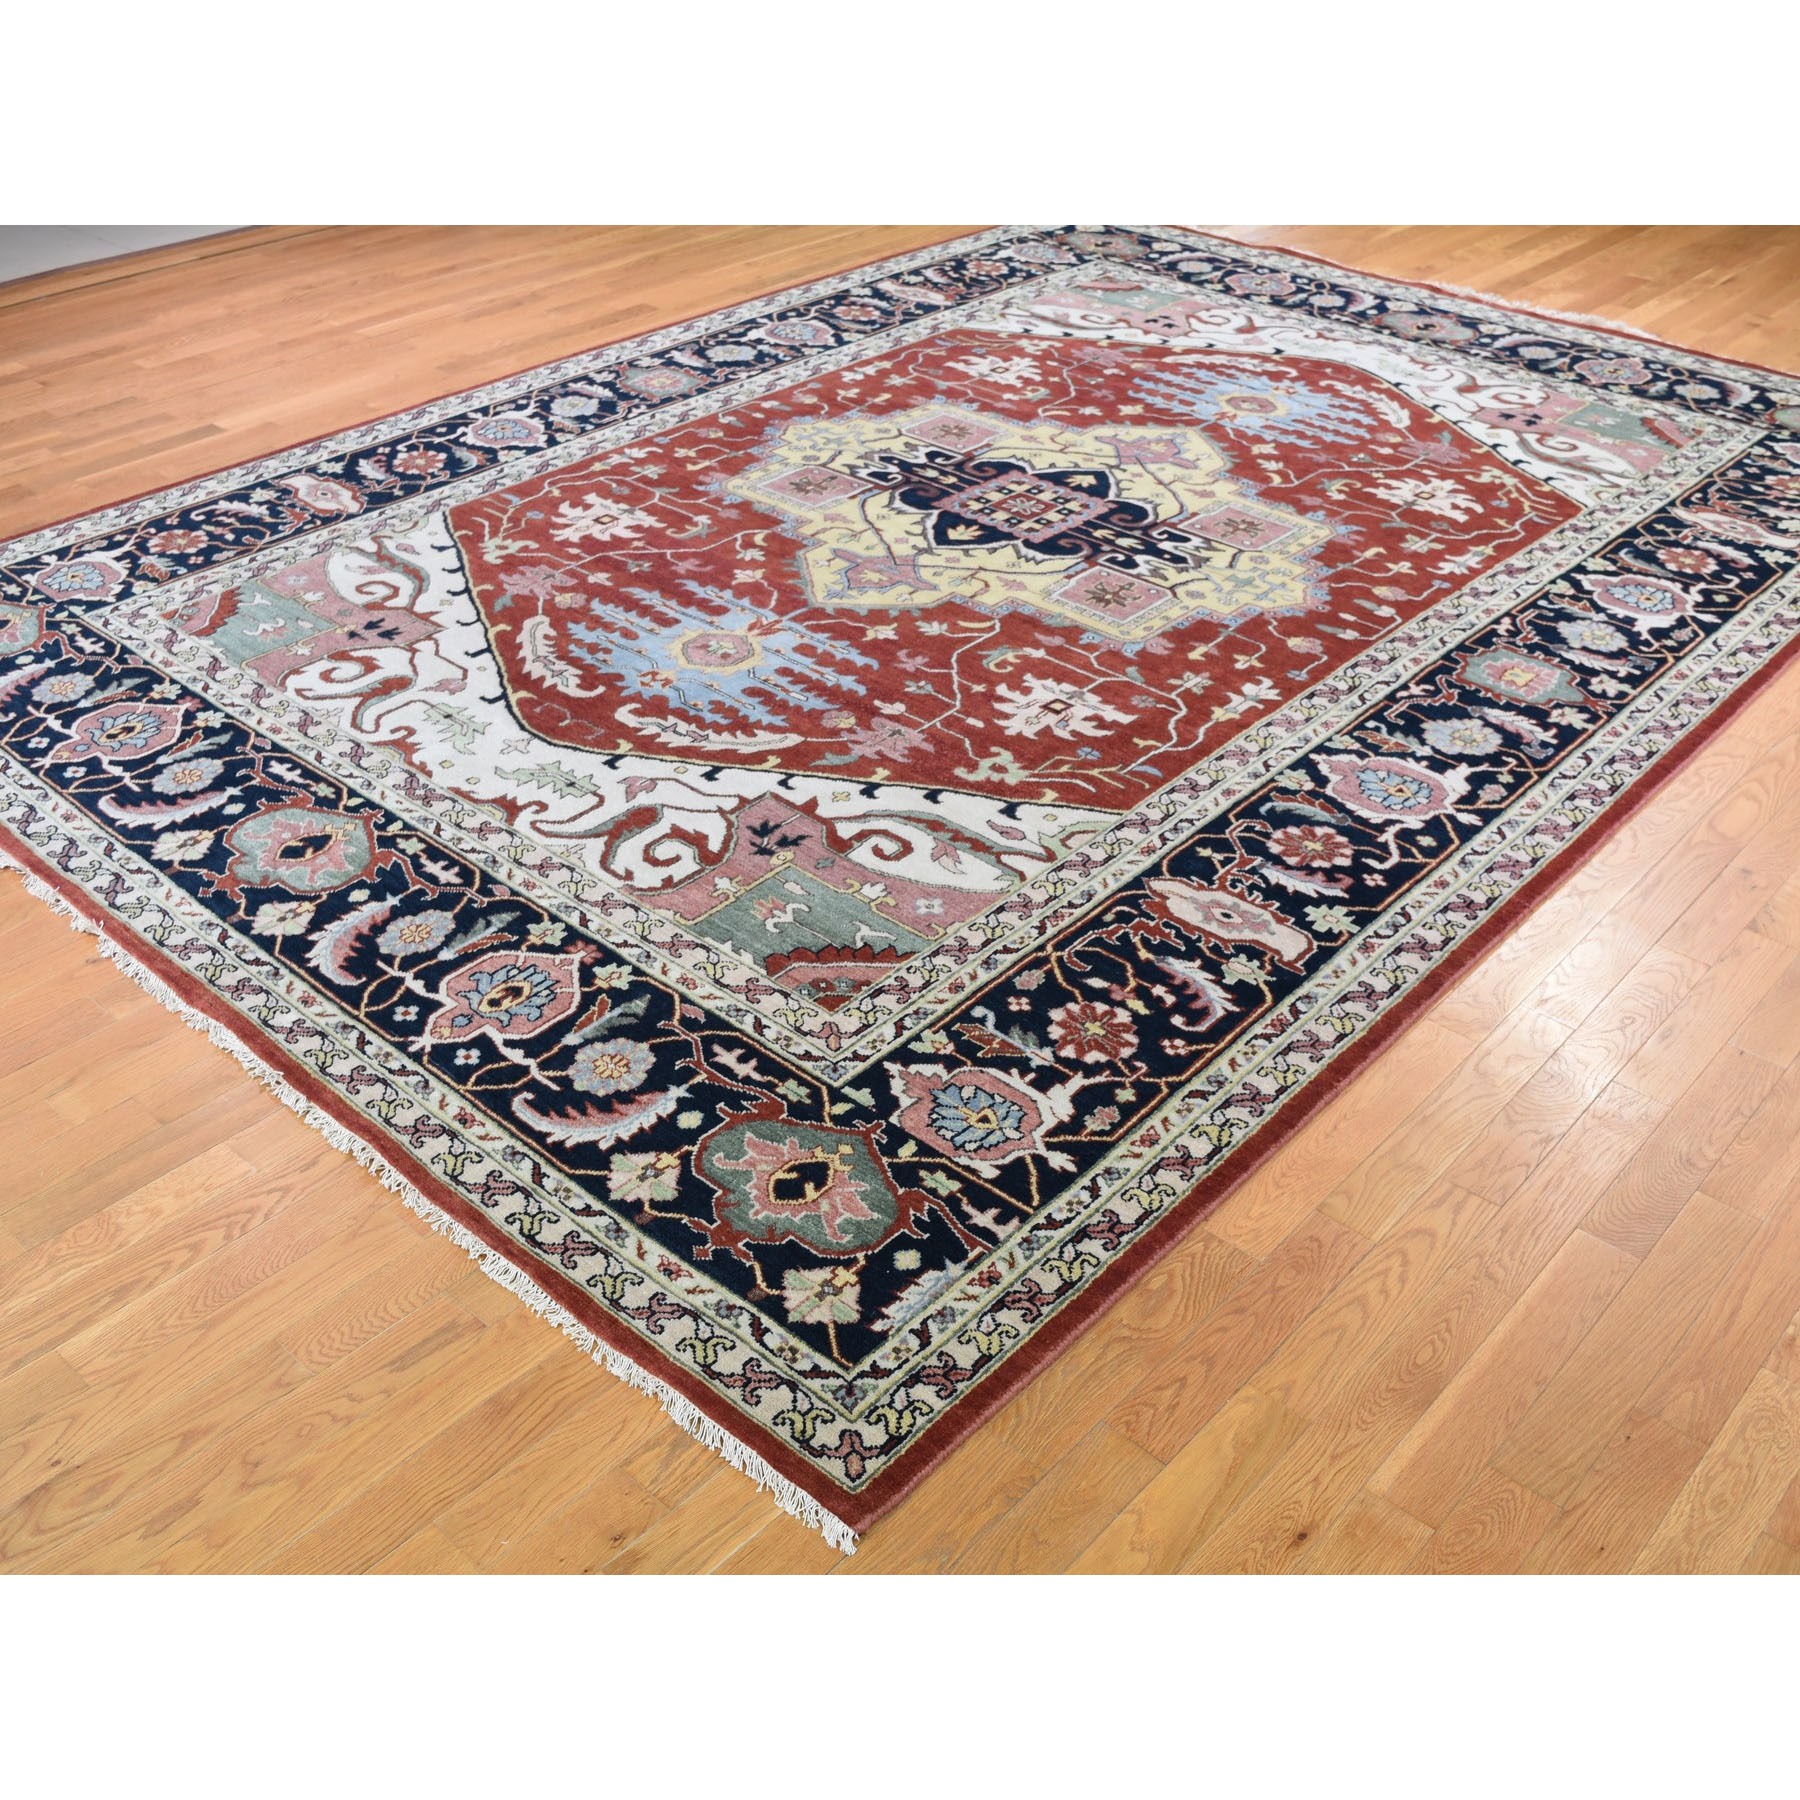 10-x13-8  Red Heriz Revival Pure Wool Hand Knotted Oriental Rug 